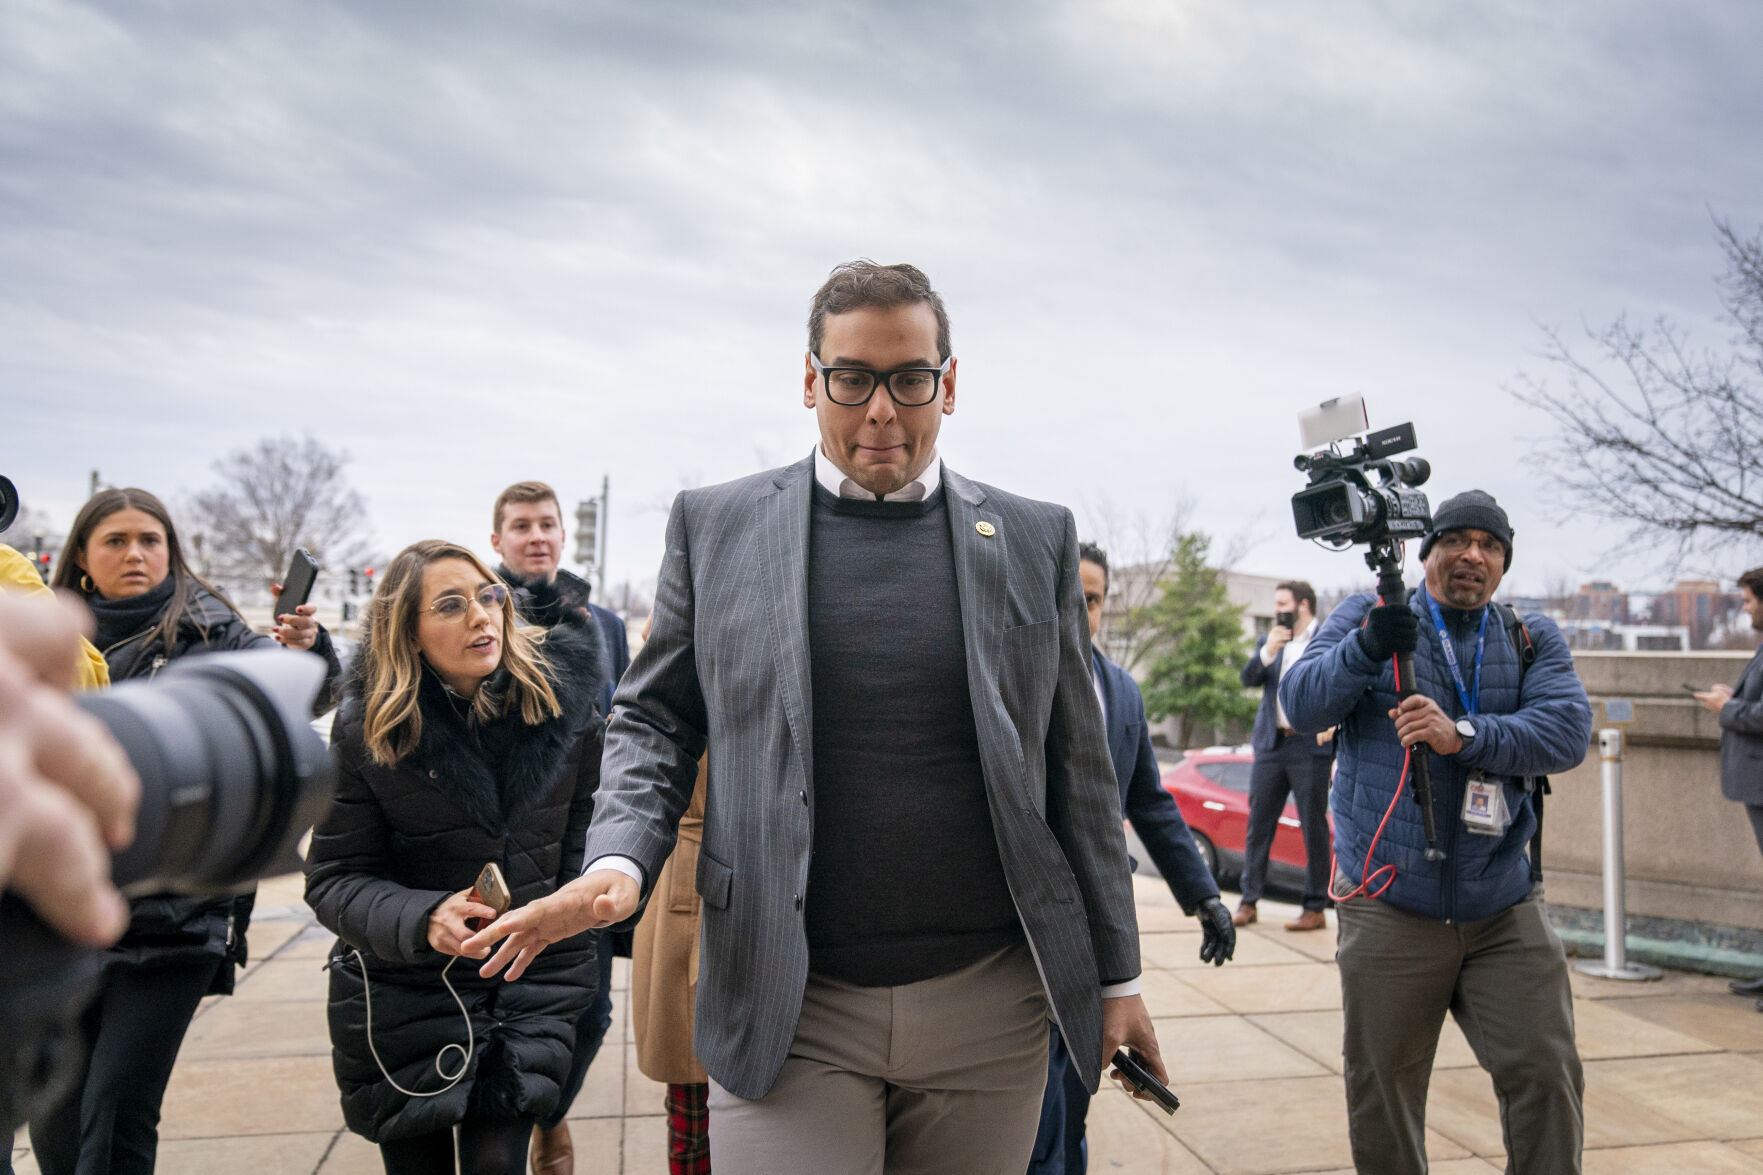 <p>FILE - Rep. George Santos, R-N.Y., leaves a House GOP conference meeting on Capitol Hill in Washington, Jan. 25, 2023. Santos has been arrested on federal criminal charges. The Republican congressman has faced outrage over revelations he fabricated parts of his life story, including lying about being a wealthy Wall Street dealmaker. Santos was arrested Wednesday. (AP Photo/Andrew Harnik, File)</p>   PHOTO CREDIT: Andrew Harnik